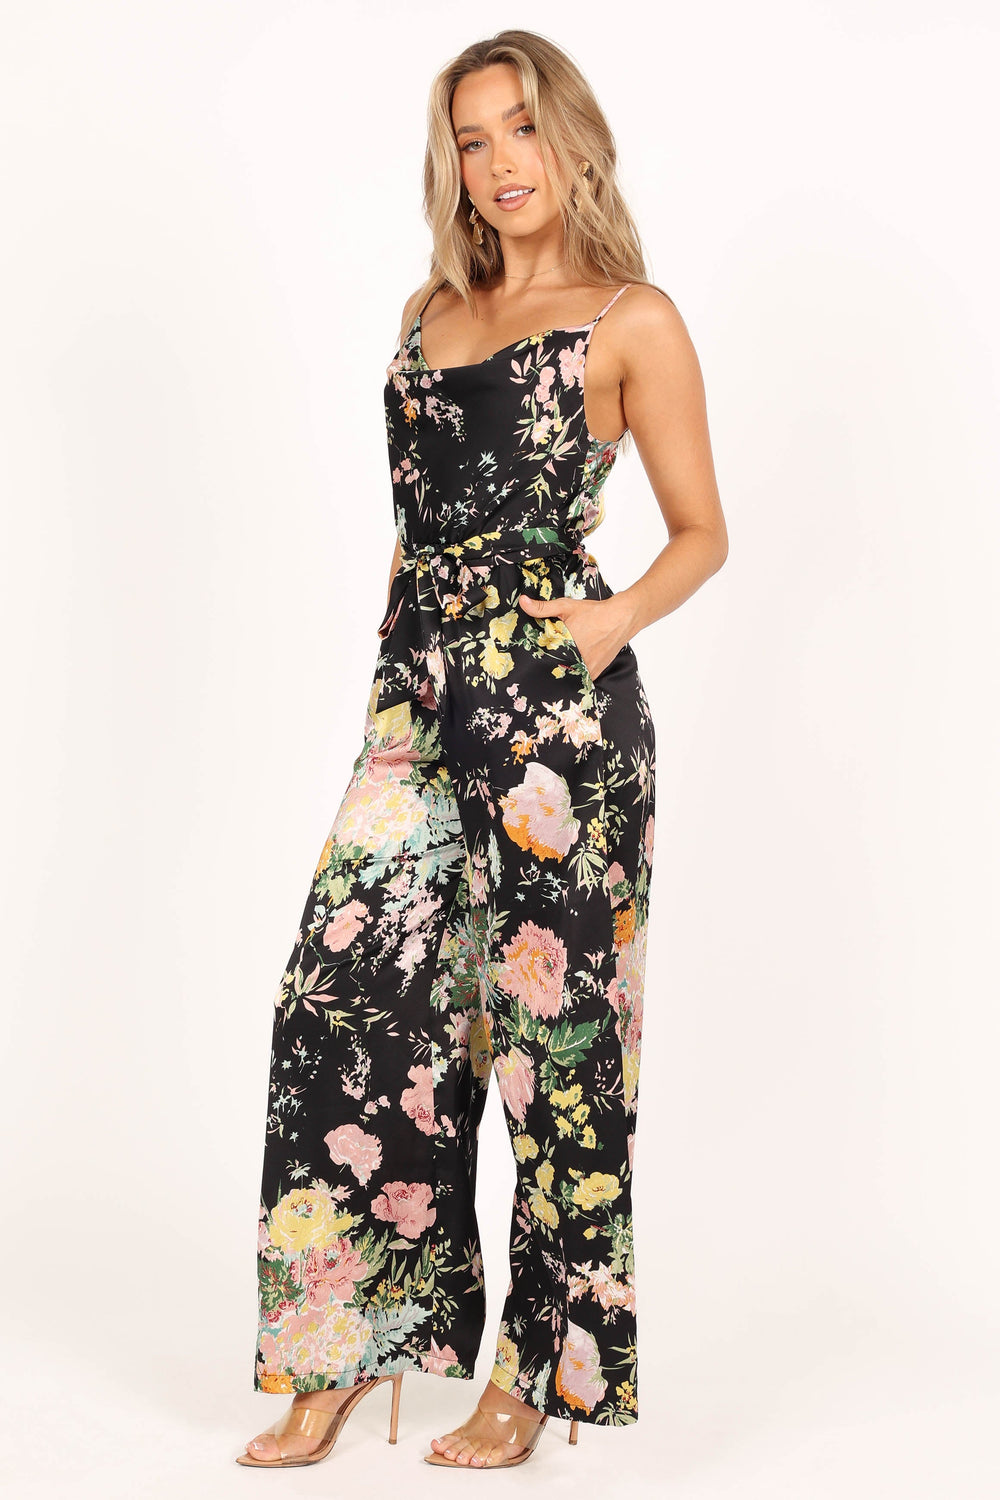 Petal and Pup USA Rompers Persia Jumpsuit - Black Floral